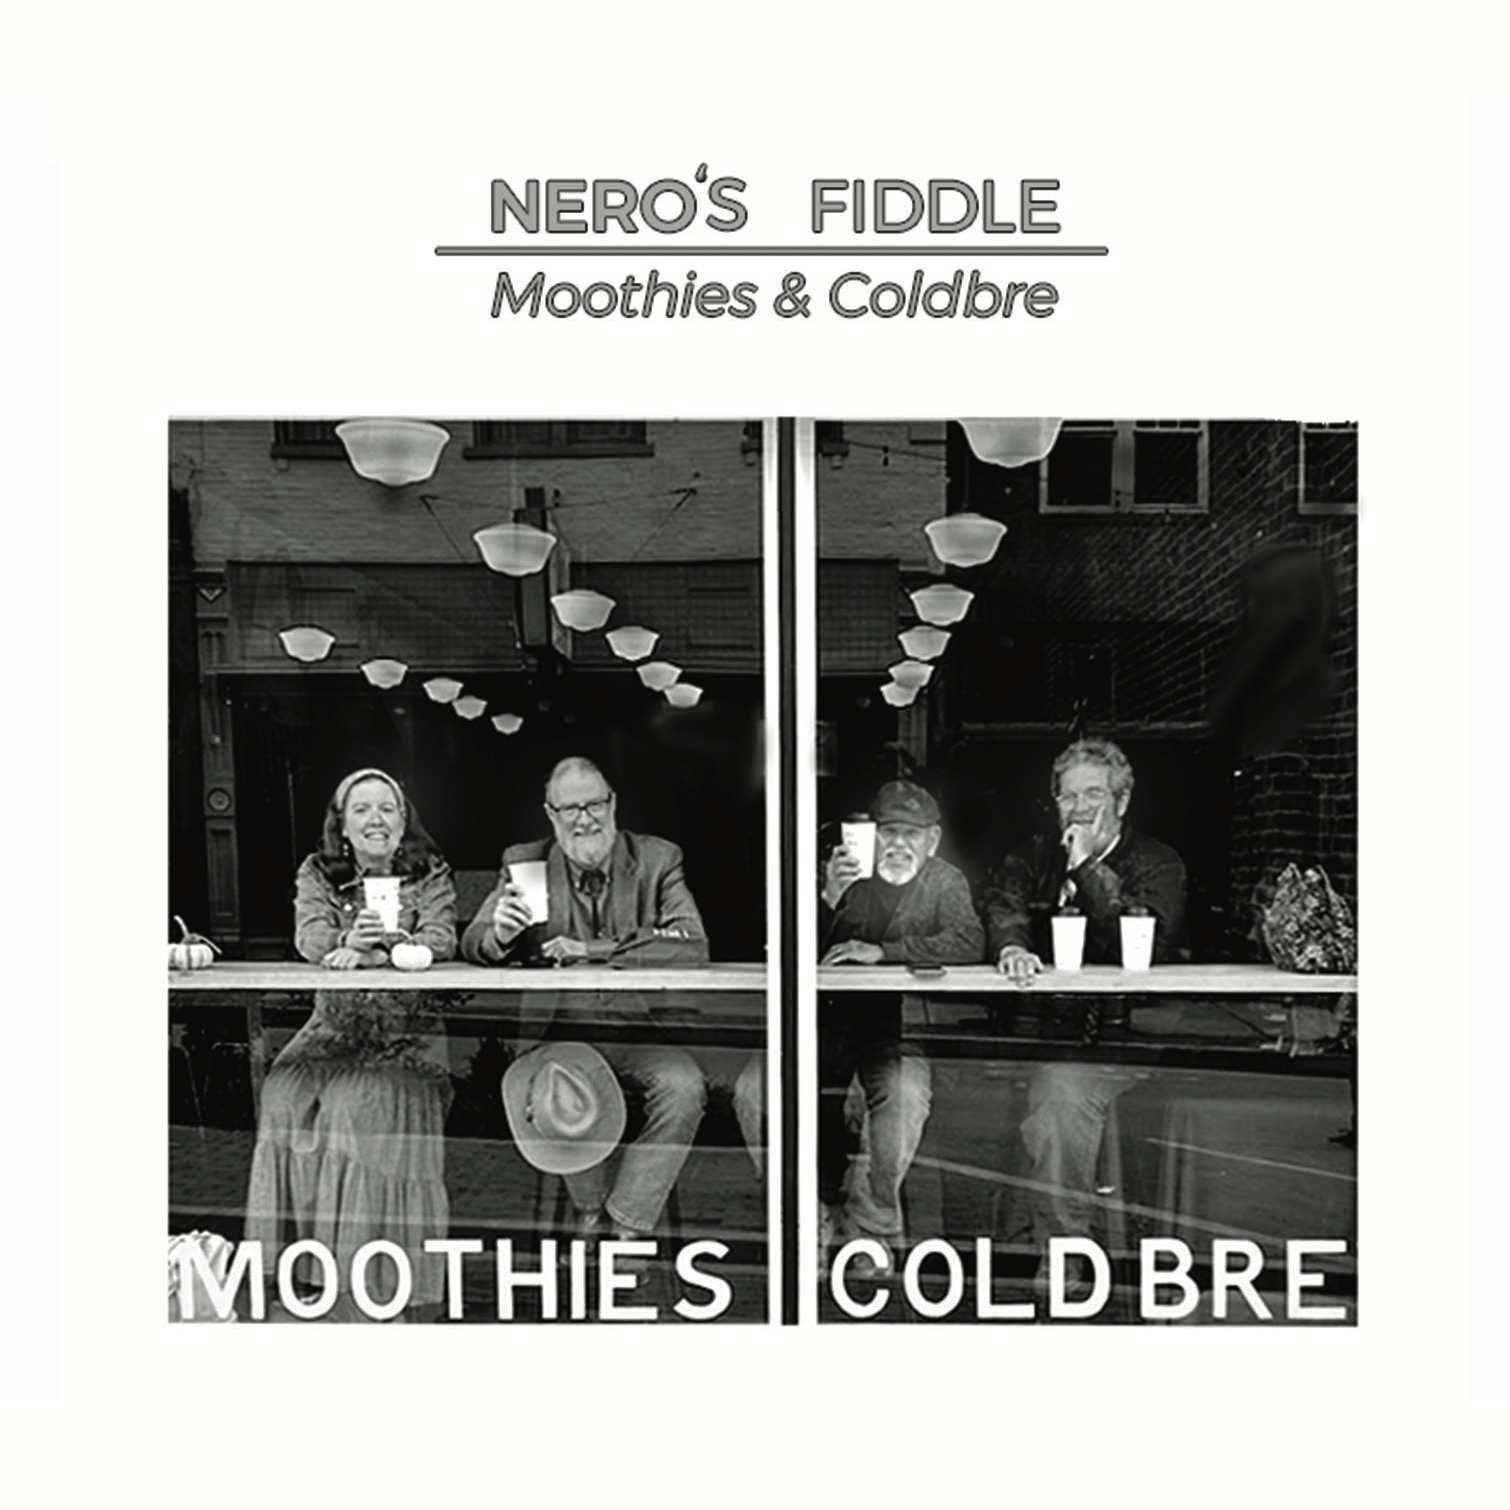 Moothies and Coldbre